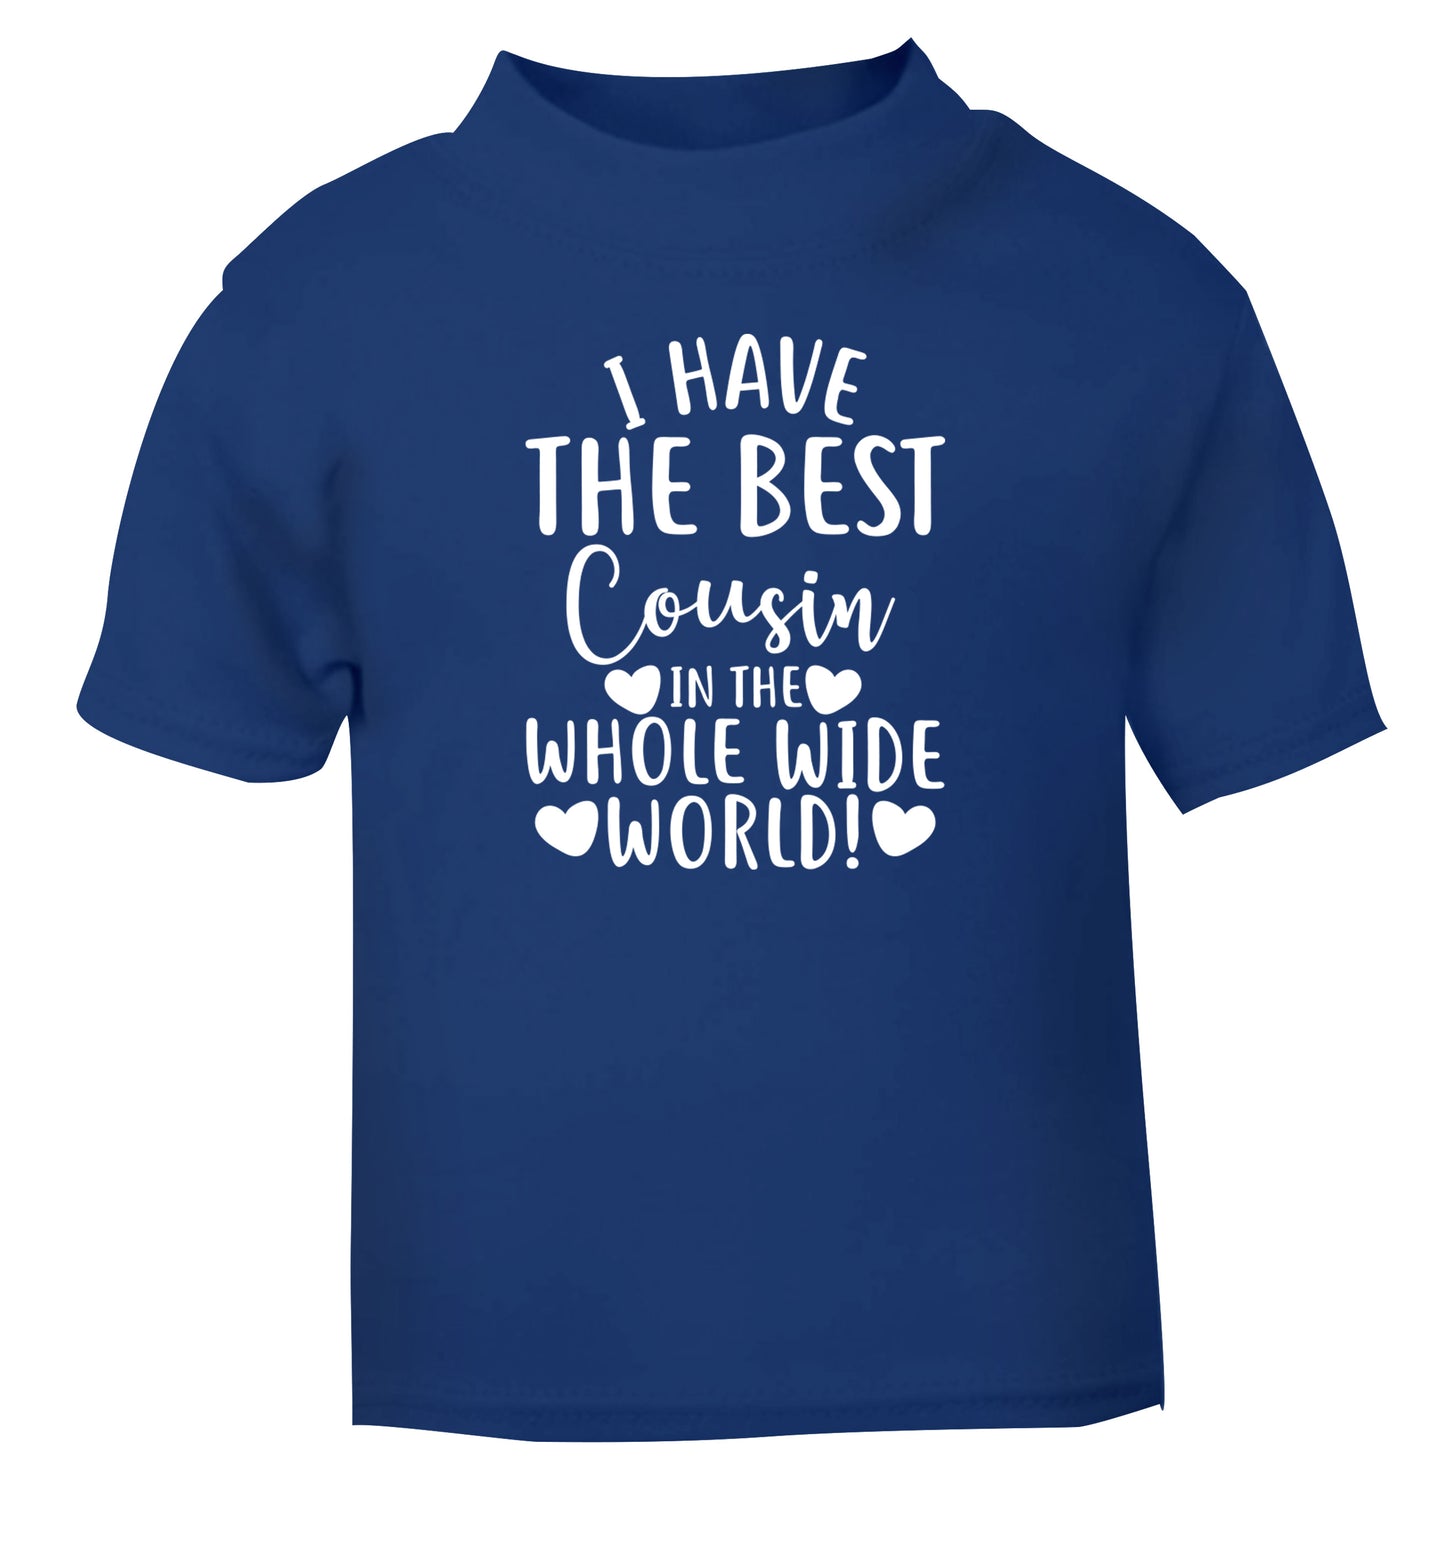 I have the best cousin in the whole wide world! blue Baby Toddler Tshirt 2 Years